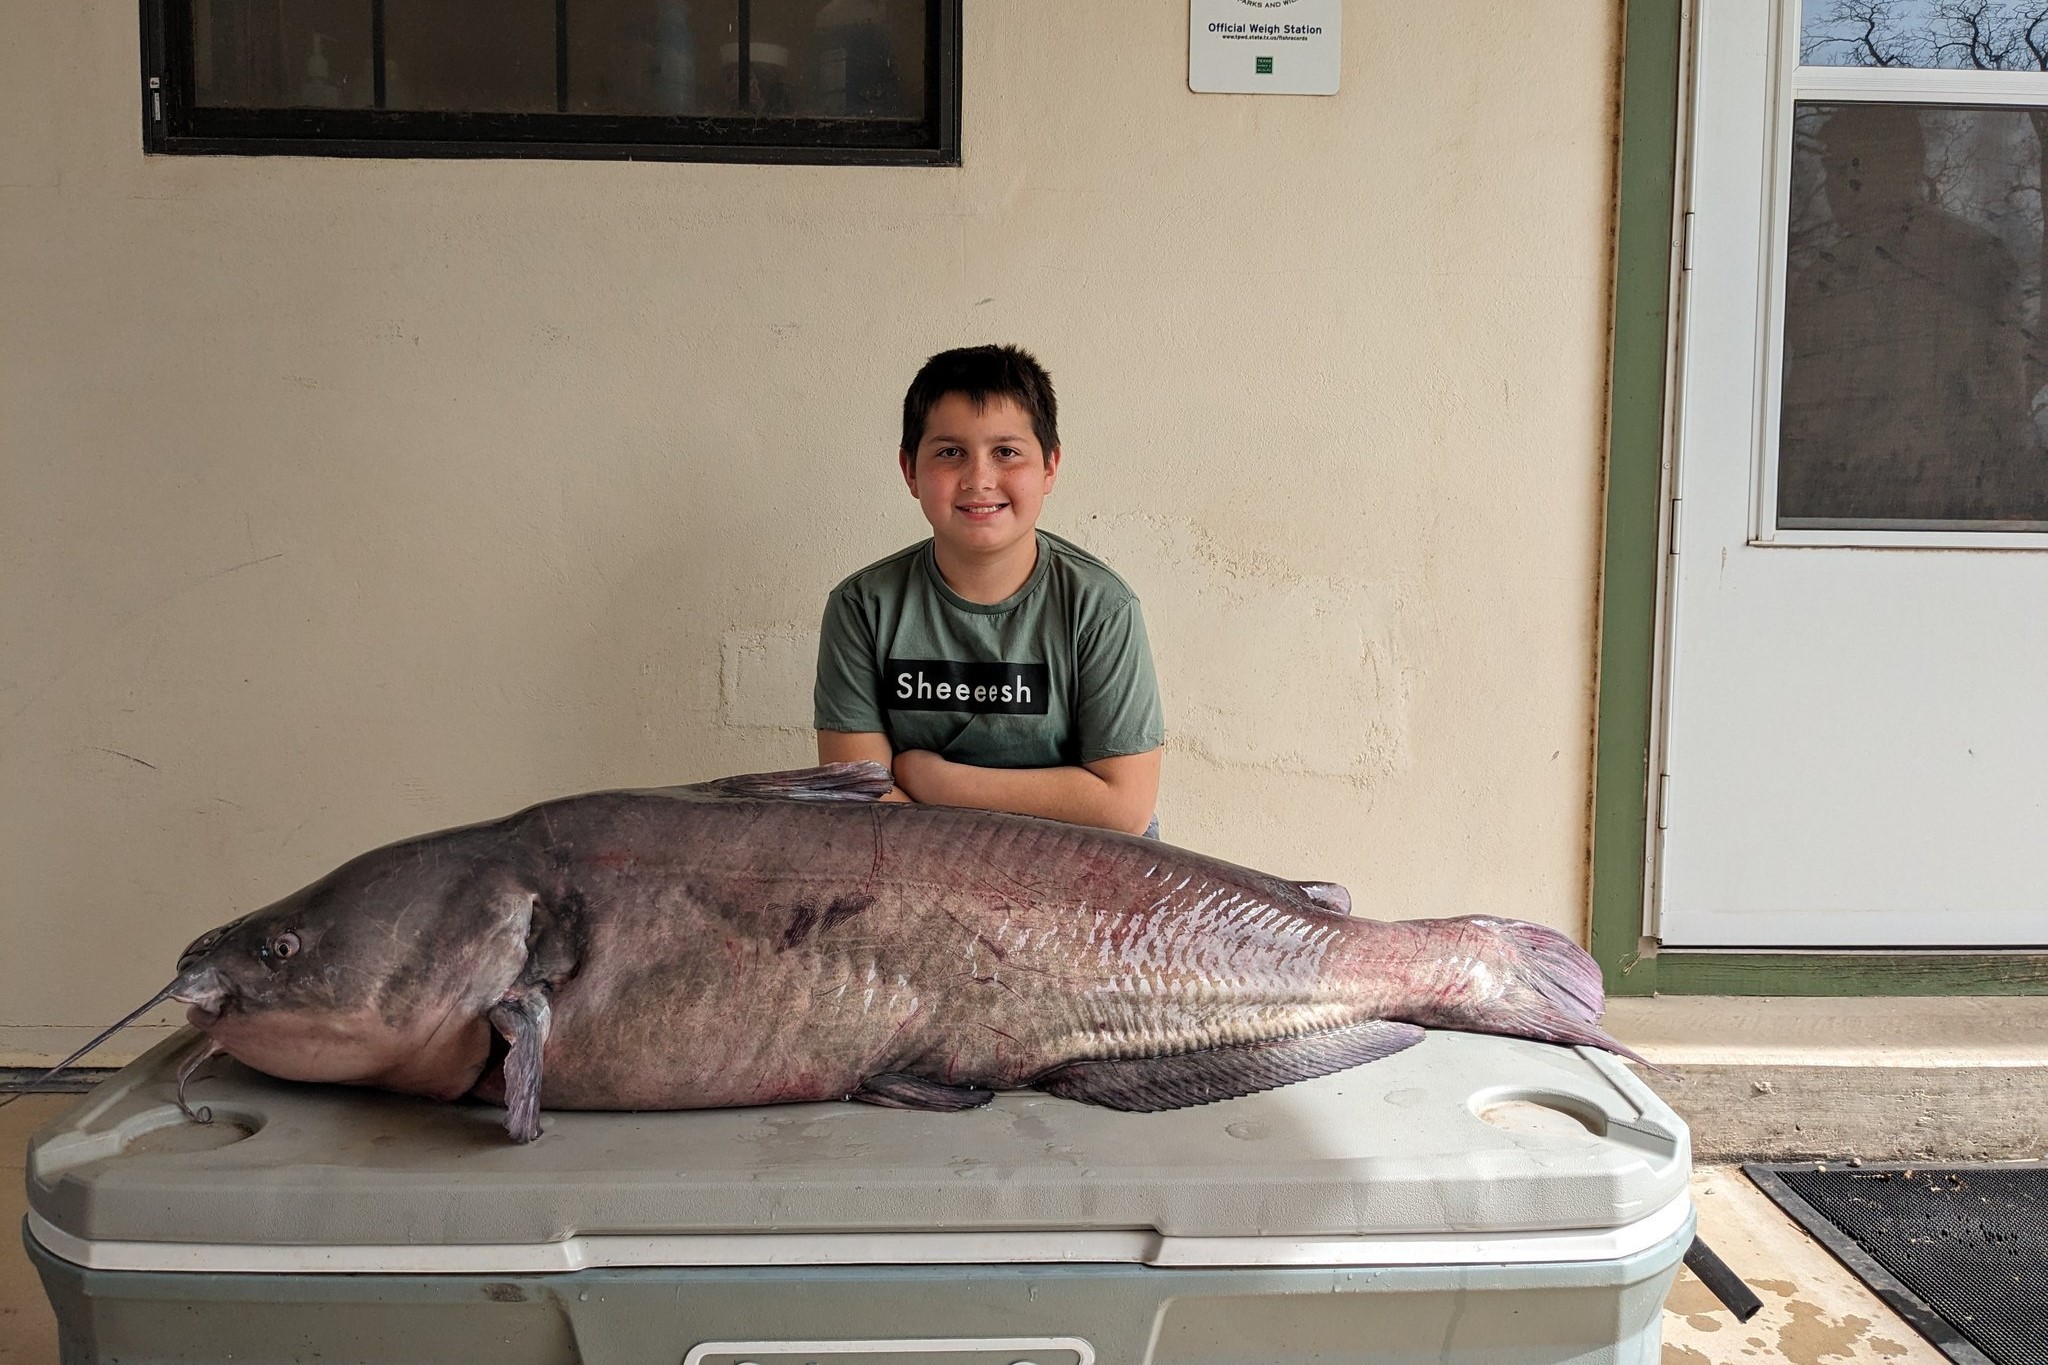 9-year-old Texas angler lands record-breaking blue catfish